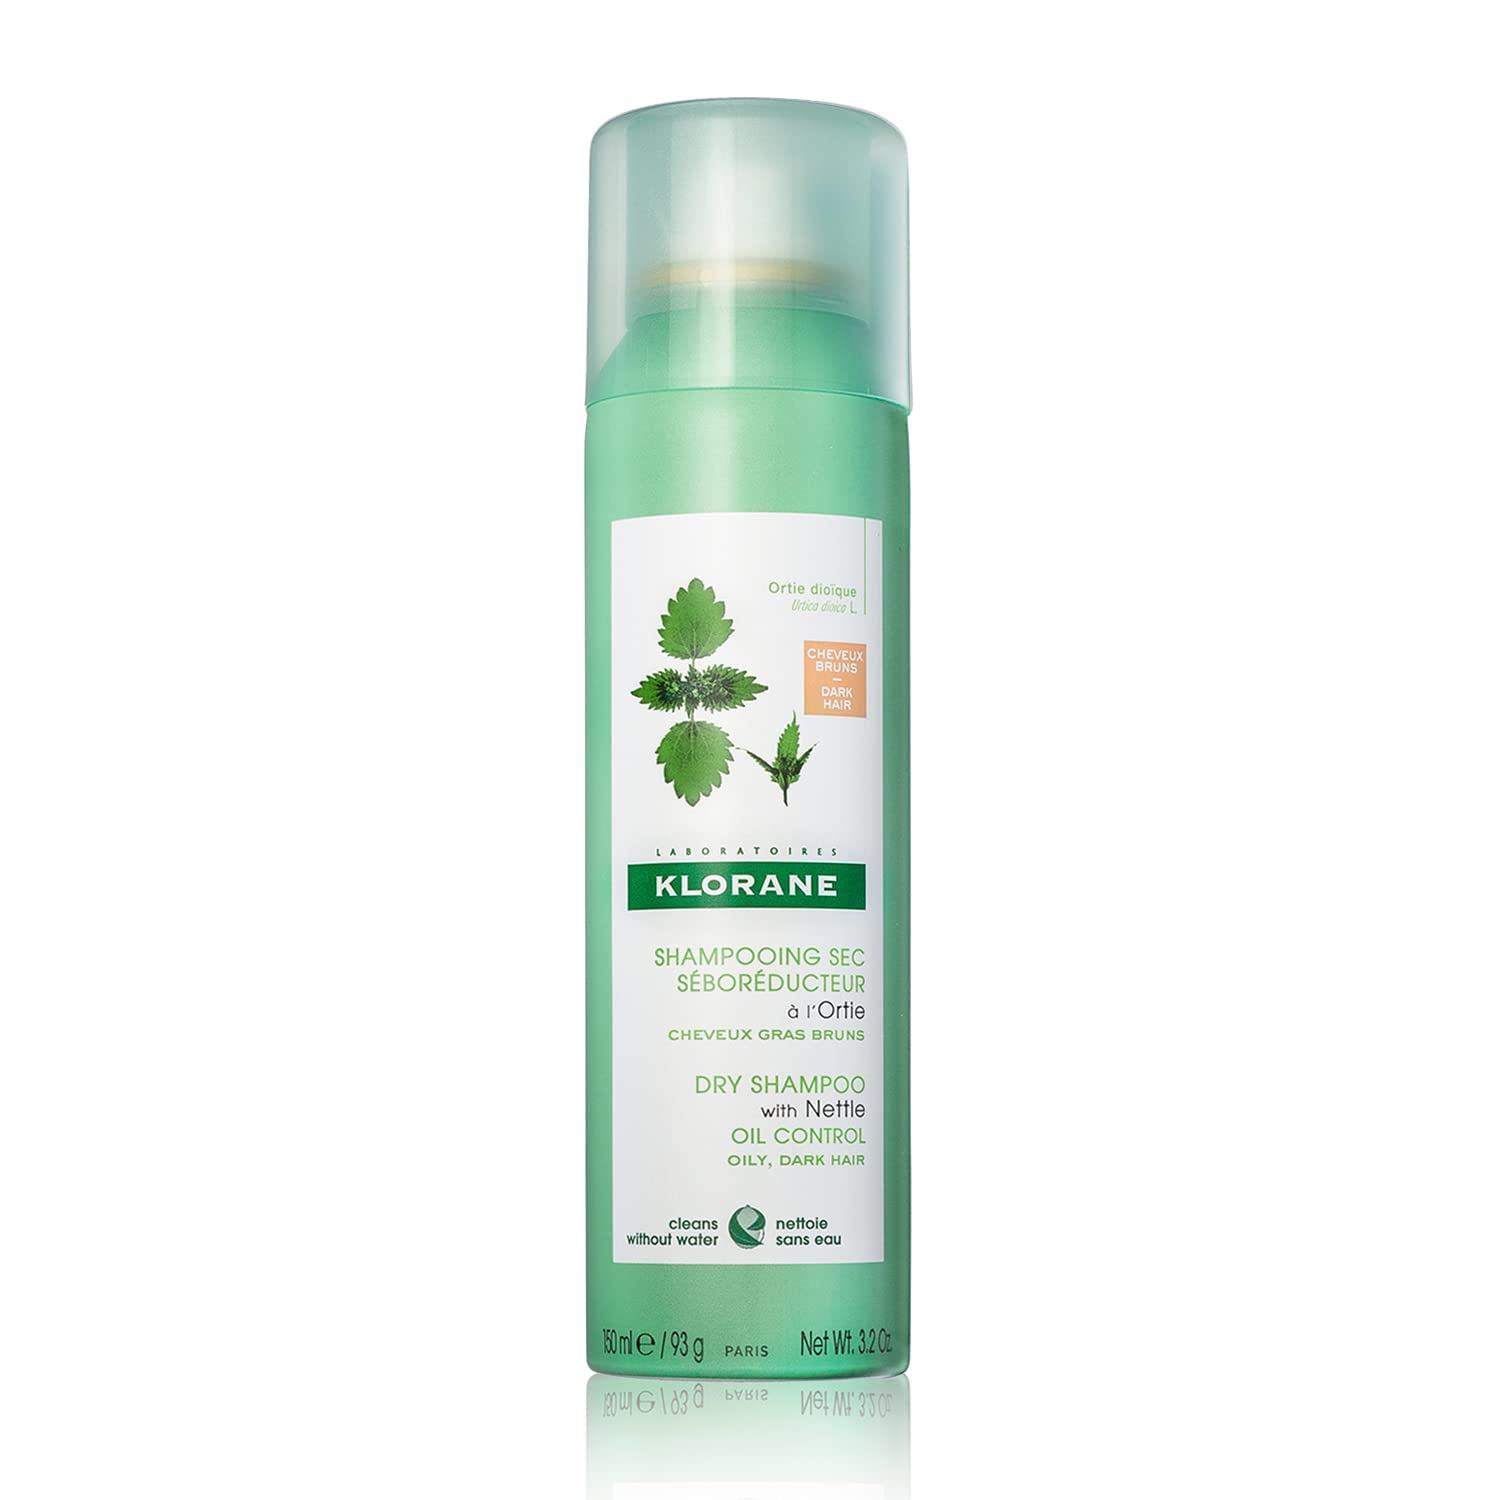 Klorane Dry Shampoo with Nettle, Natural Tint for Brunettes, for Oily Hair and Scalp, Regulates Oil Production, Paraben & Sulfate-Free